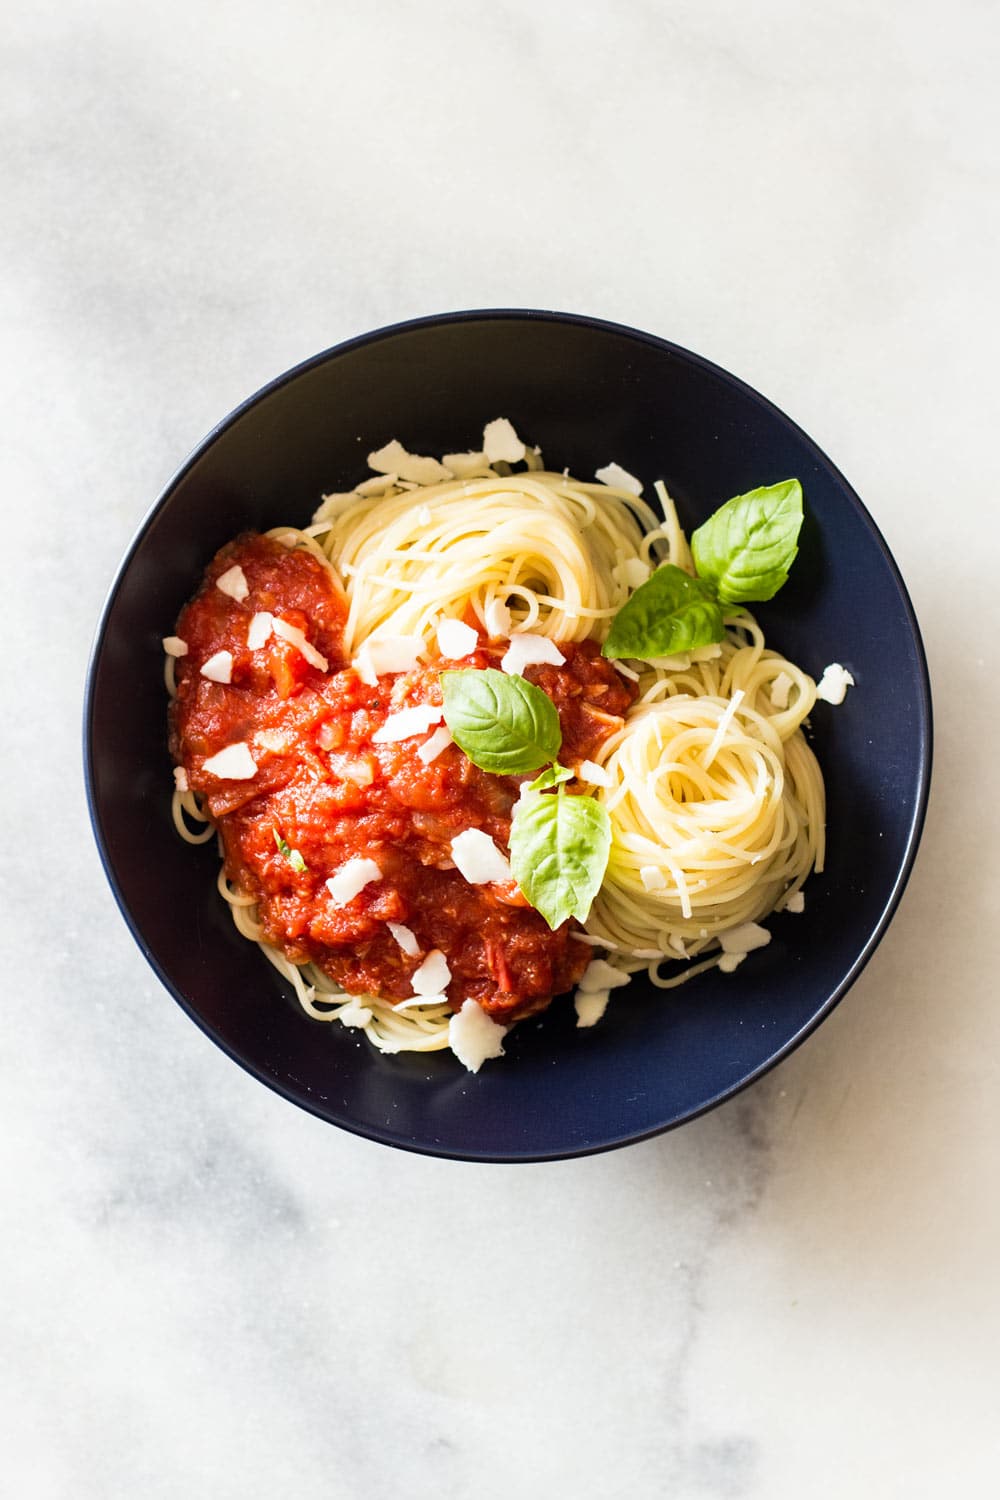 Capellini pasta topped with Roasted Garlic Tomato Sauce, garnished with fresh basil leaves, in a black bowl.